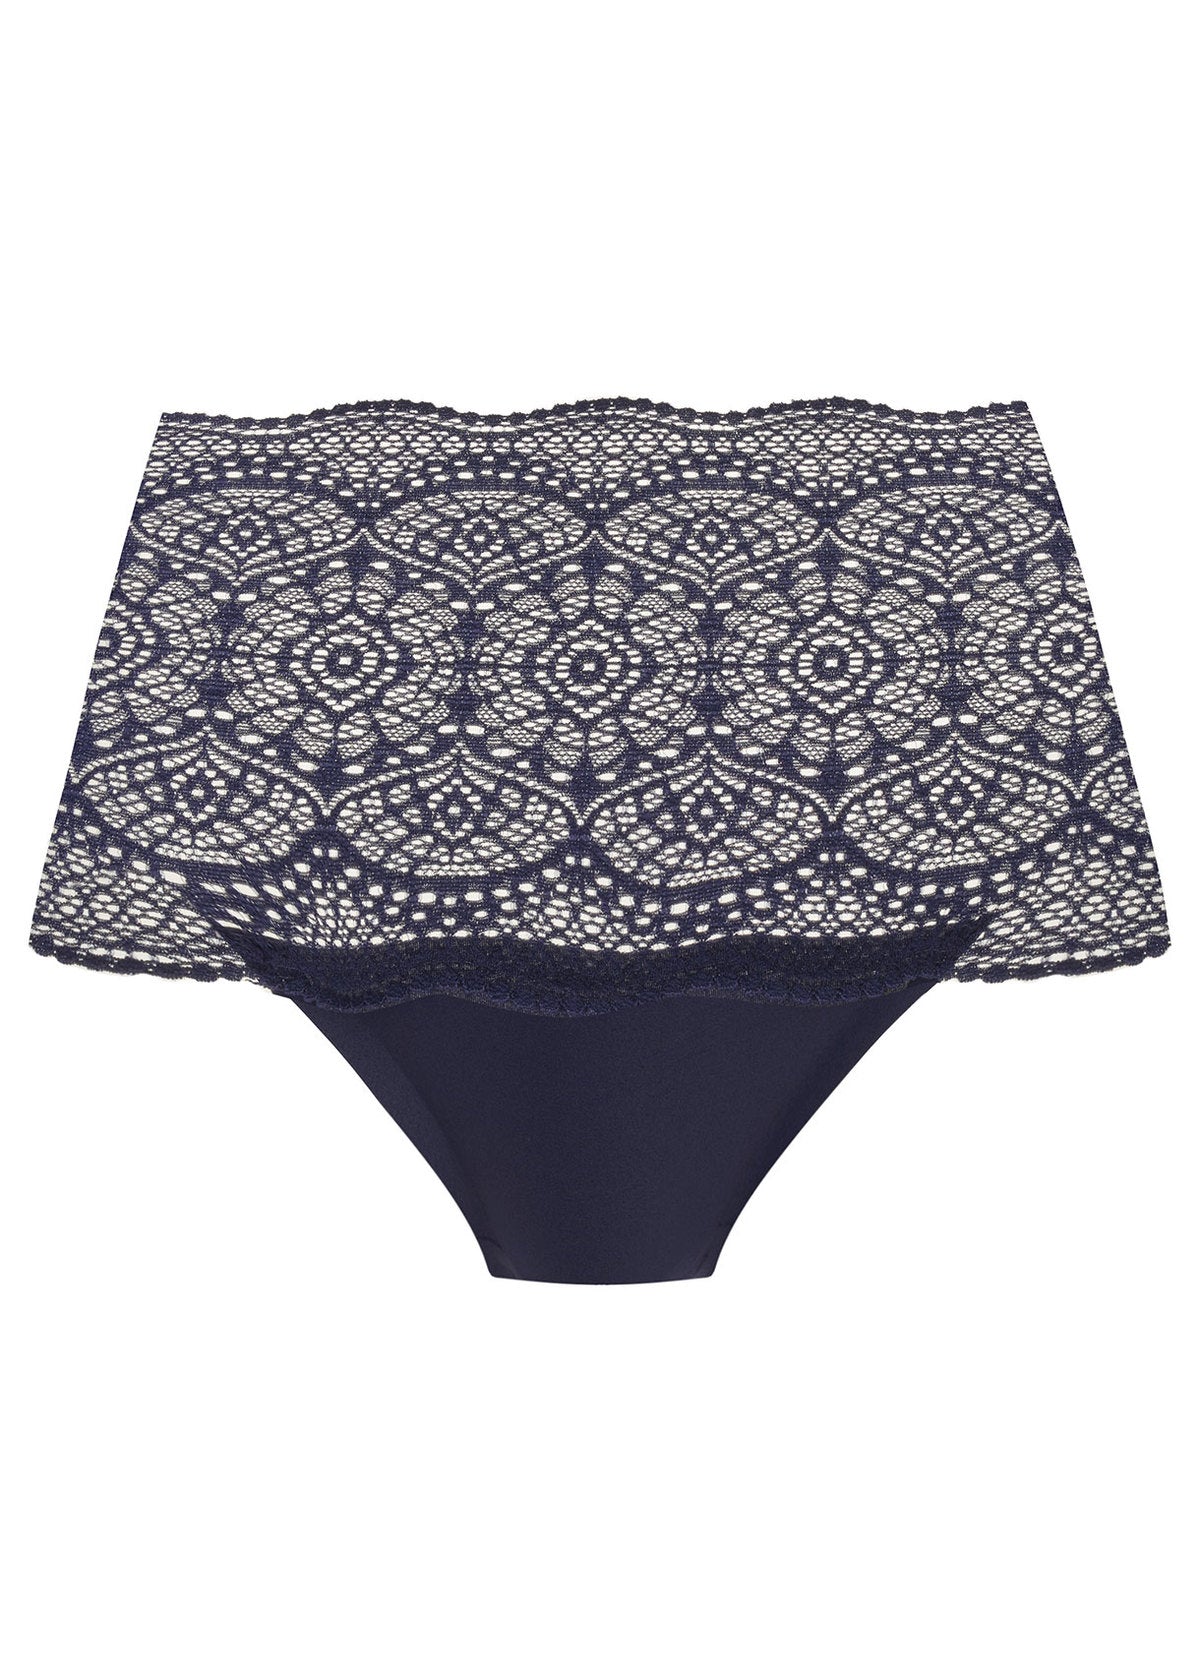 Lace Ease Invisible Stretch Full Brief in Navy front view product image